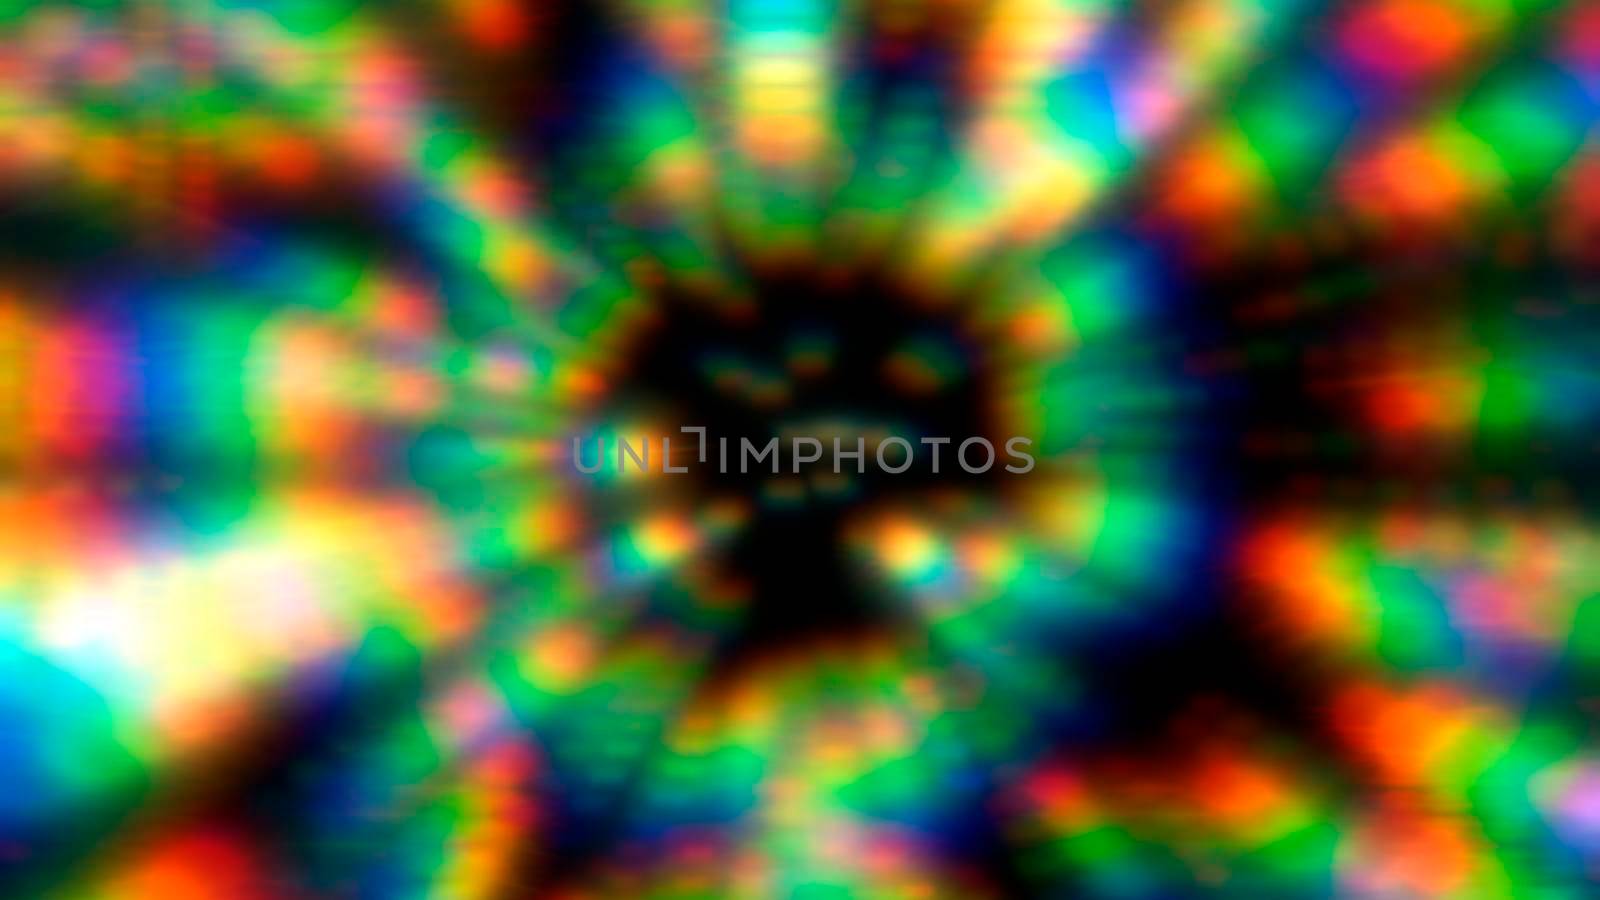 Abstract multi-colored bright background with a fancy pattern by Vvicca